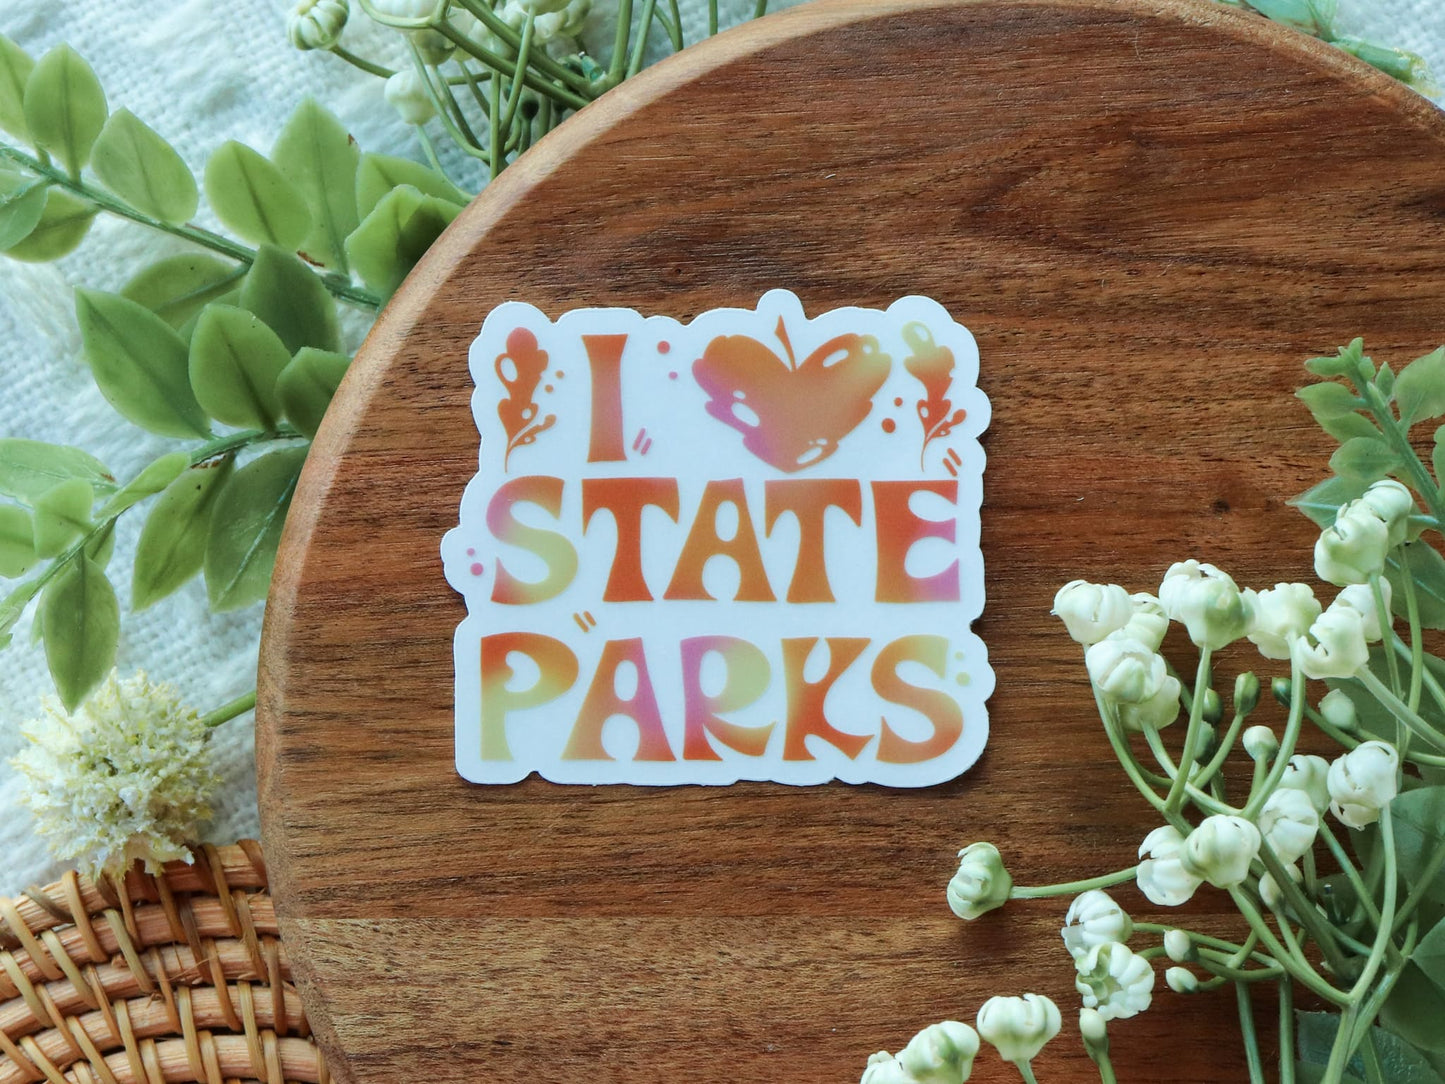 I Love State Parks clear sticker